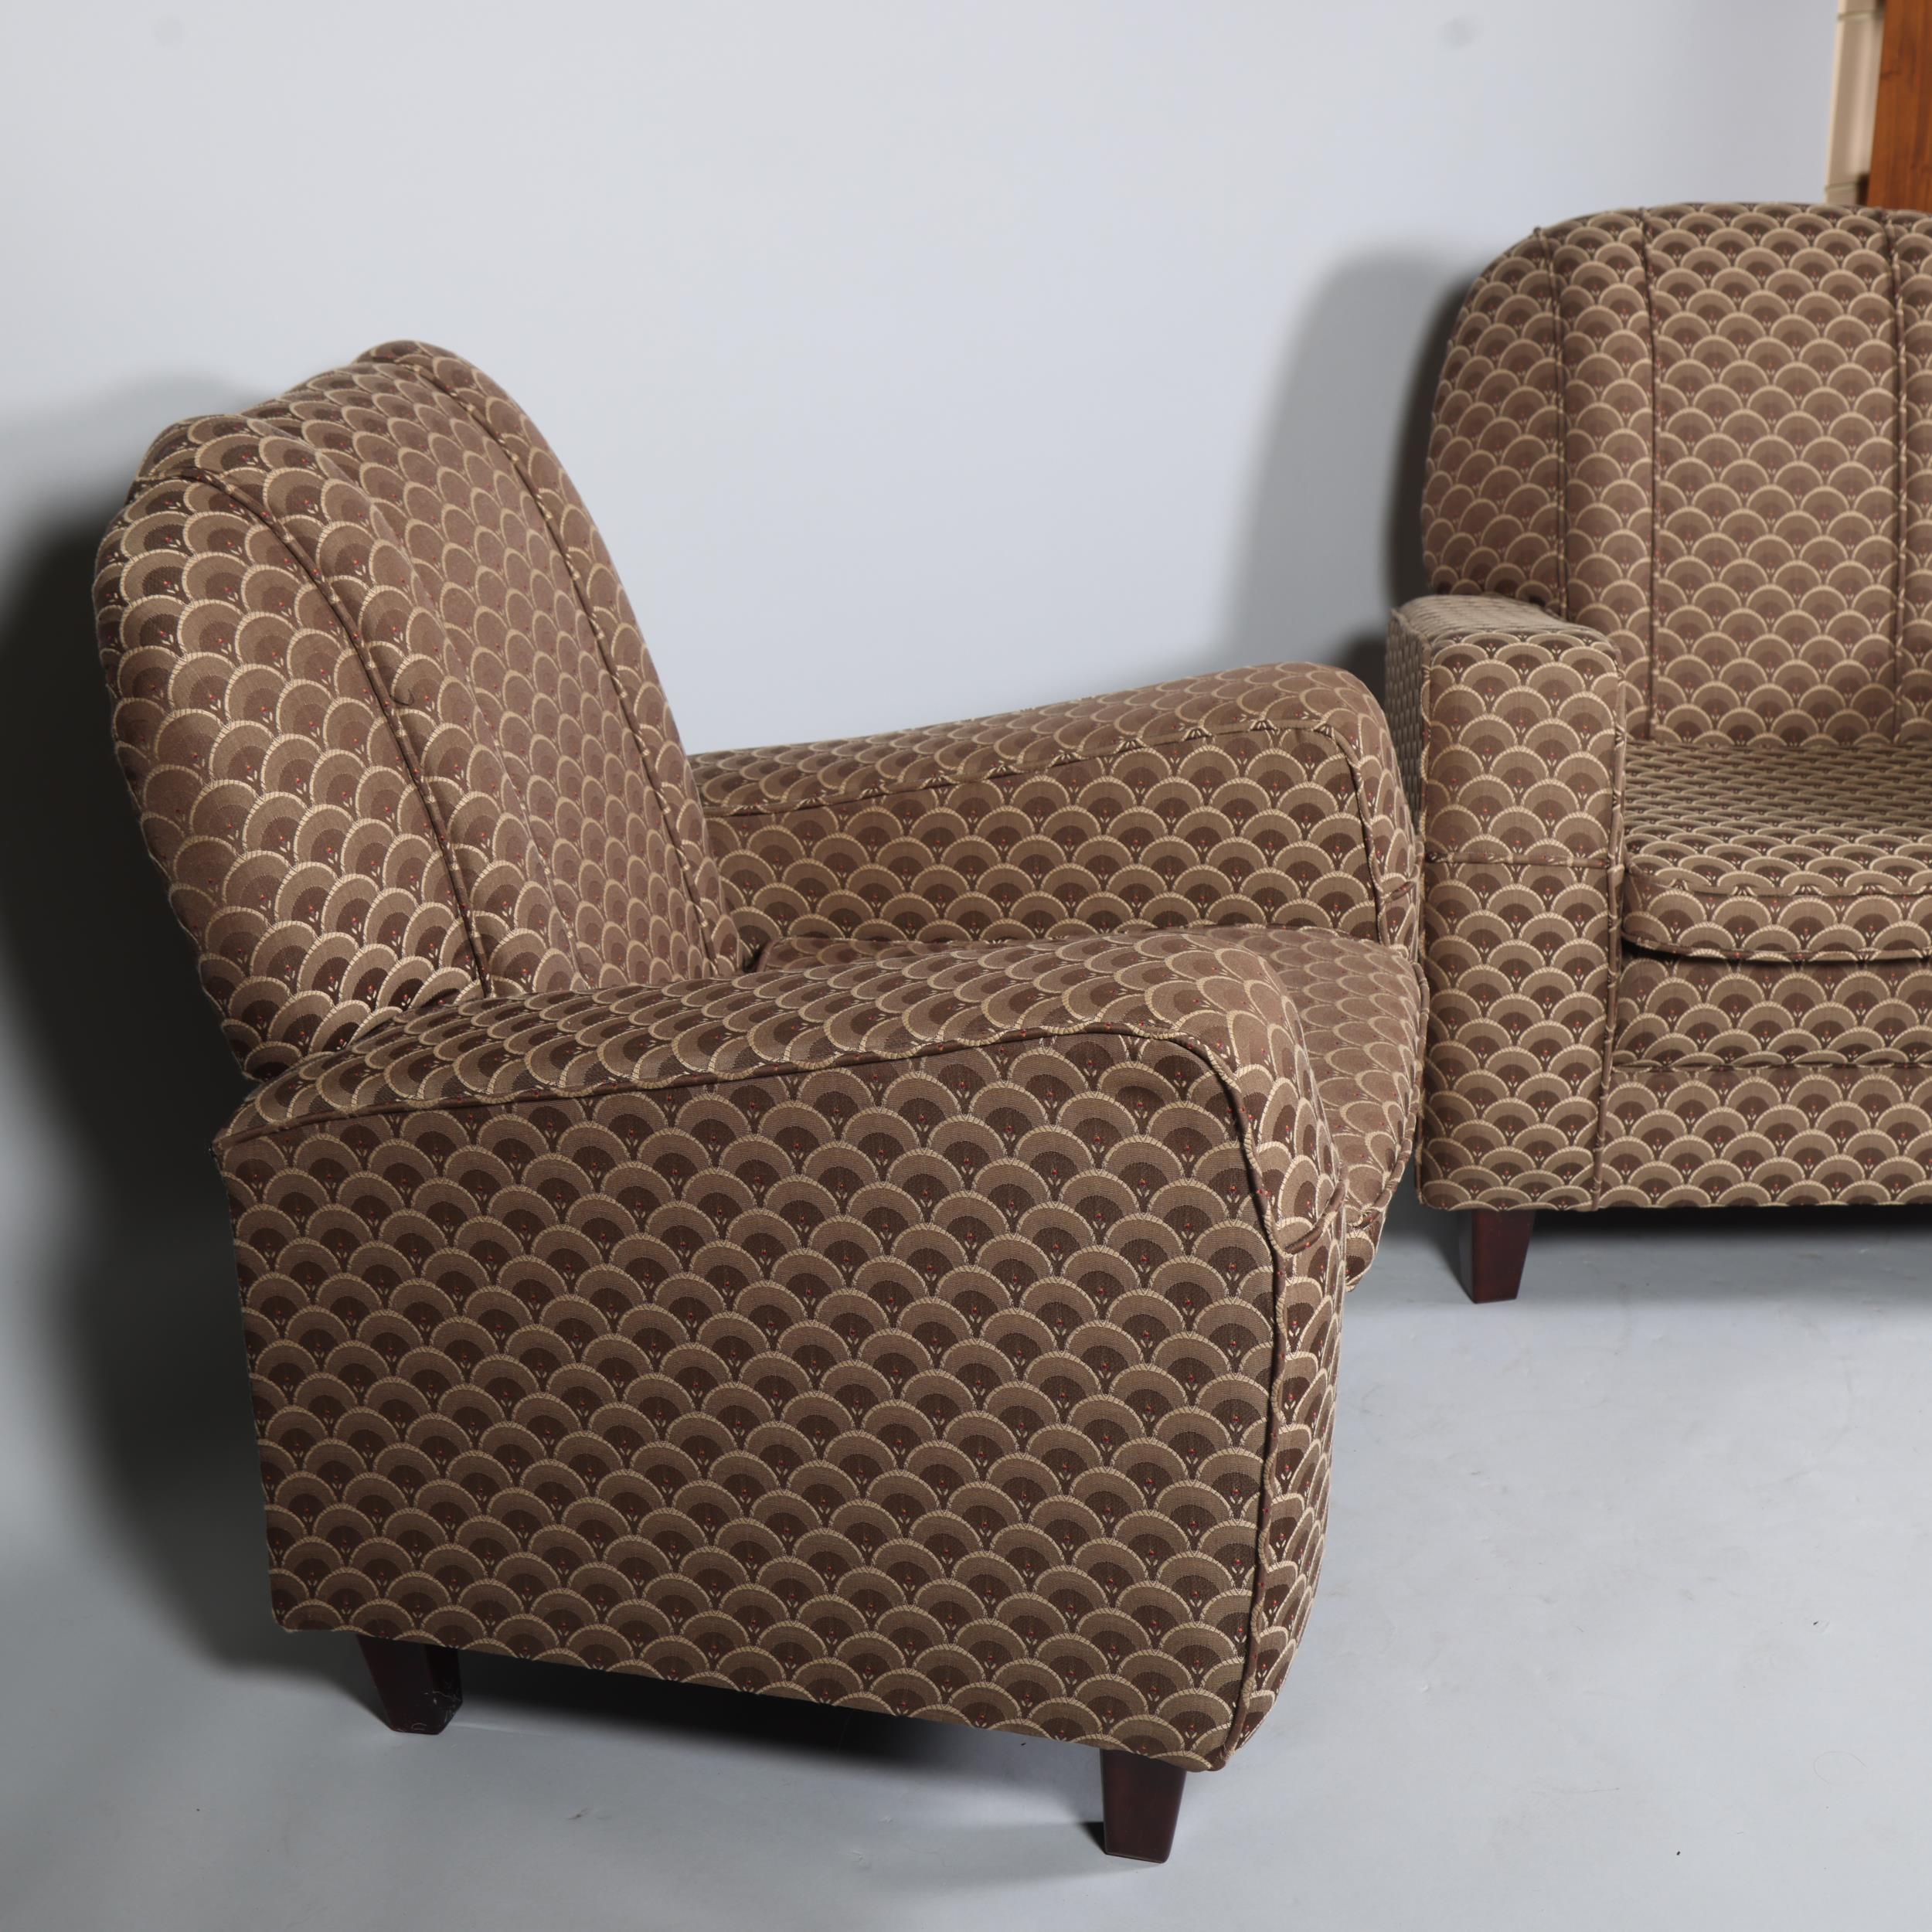 Pair of Art Deco style upholstered armchairs, overall arm width 82cm - Image 2 of 4